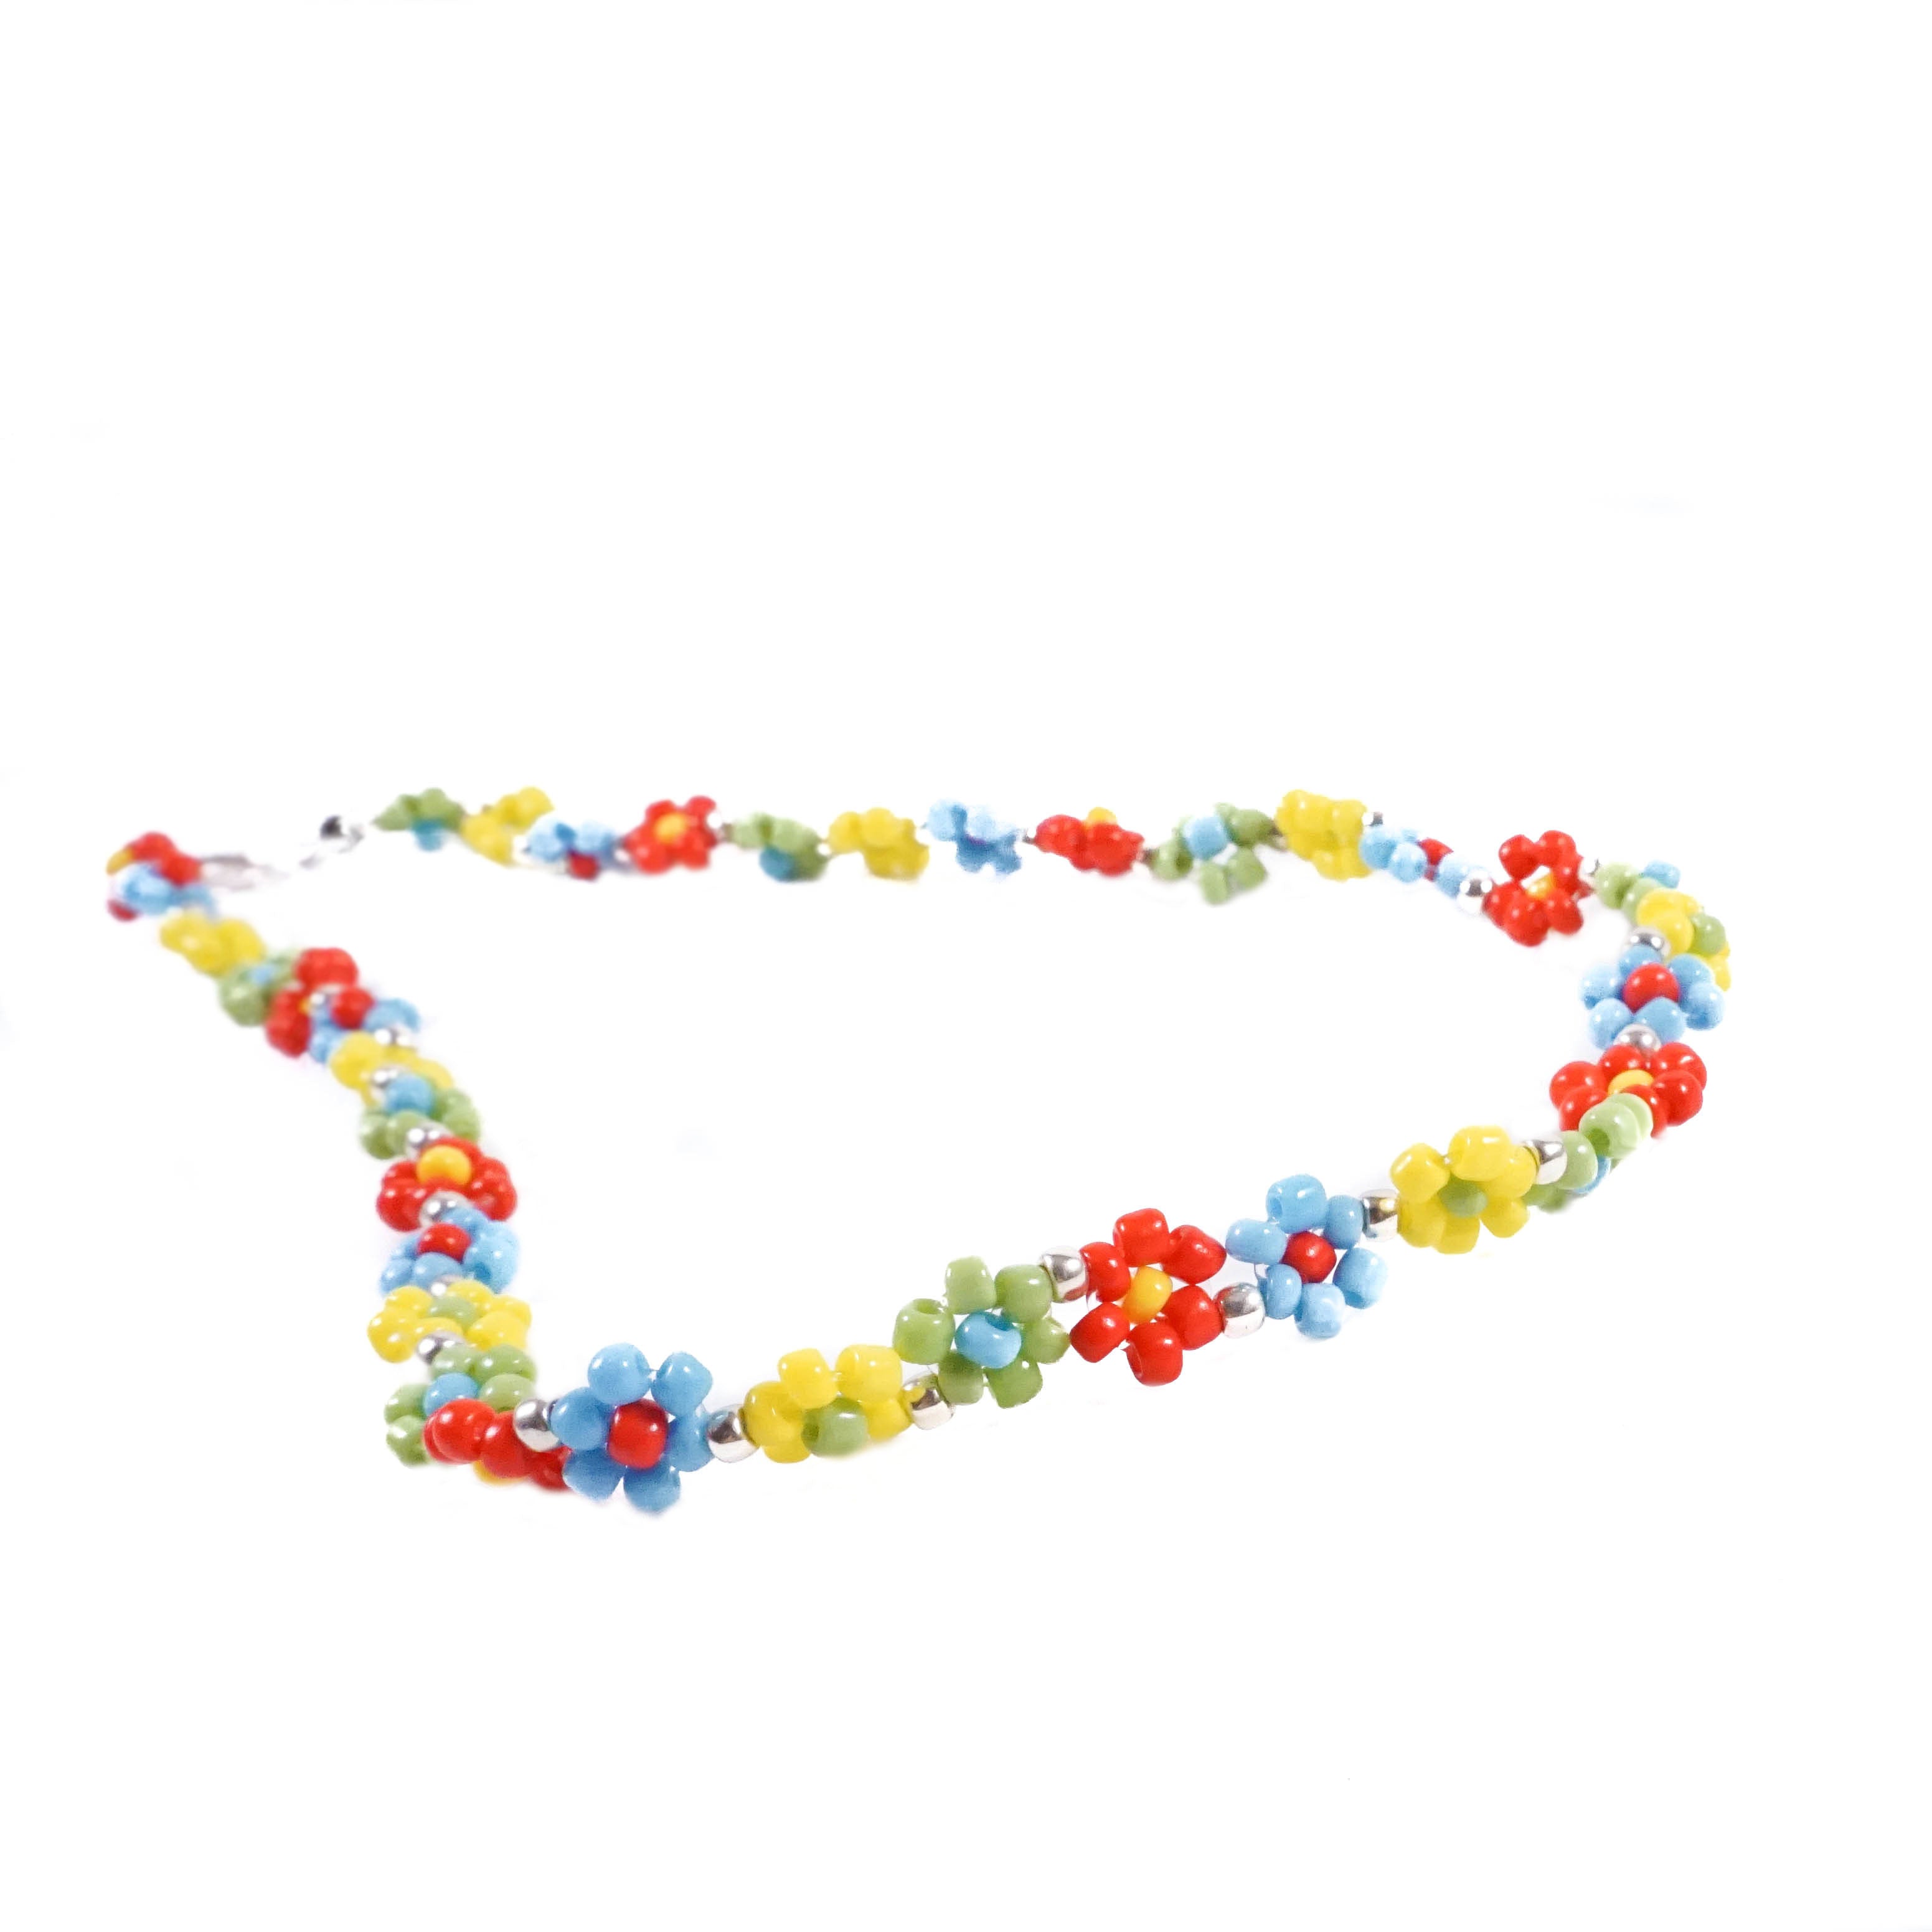 Children Beaded Flower Bracelet Colored Acrylic Flower Necklace For Girls -  China Wholesale Necklaces $1.82 from Yiwu Landy Jewelry Co. Ltd |  Globalsources.com